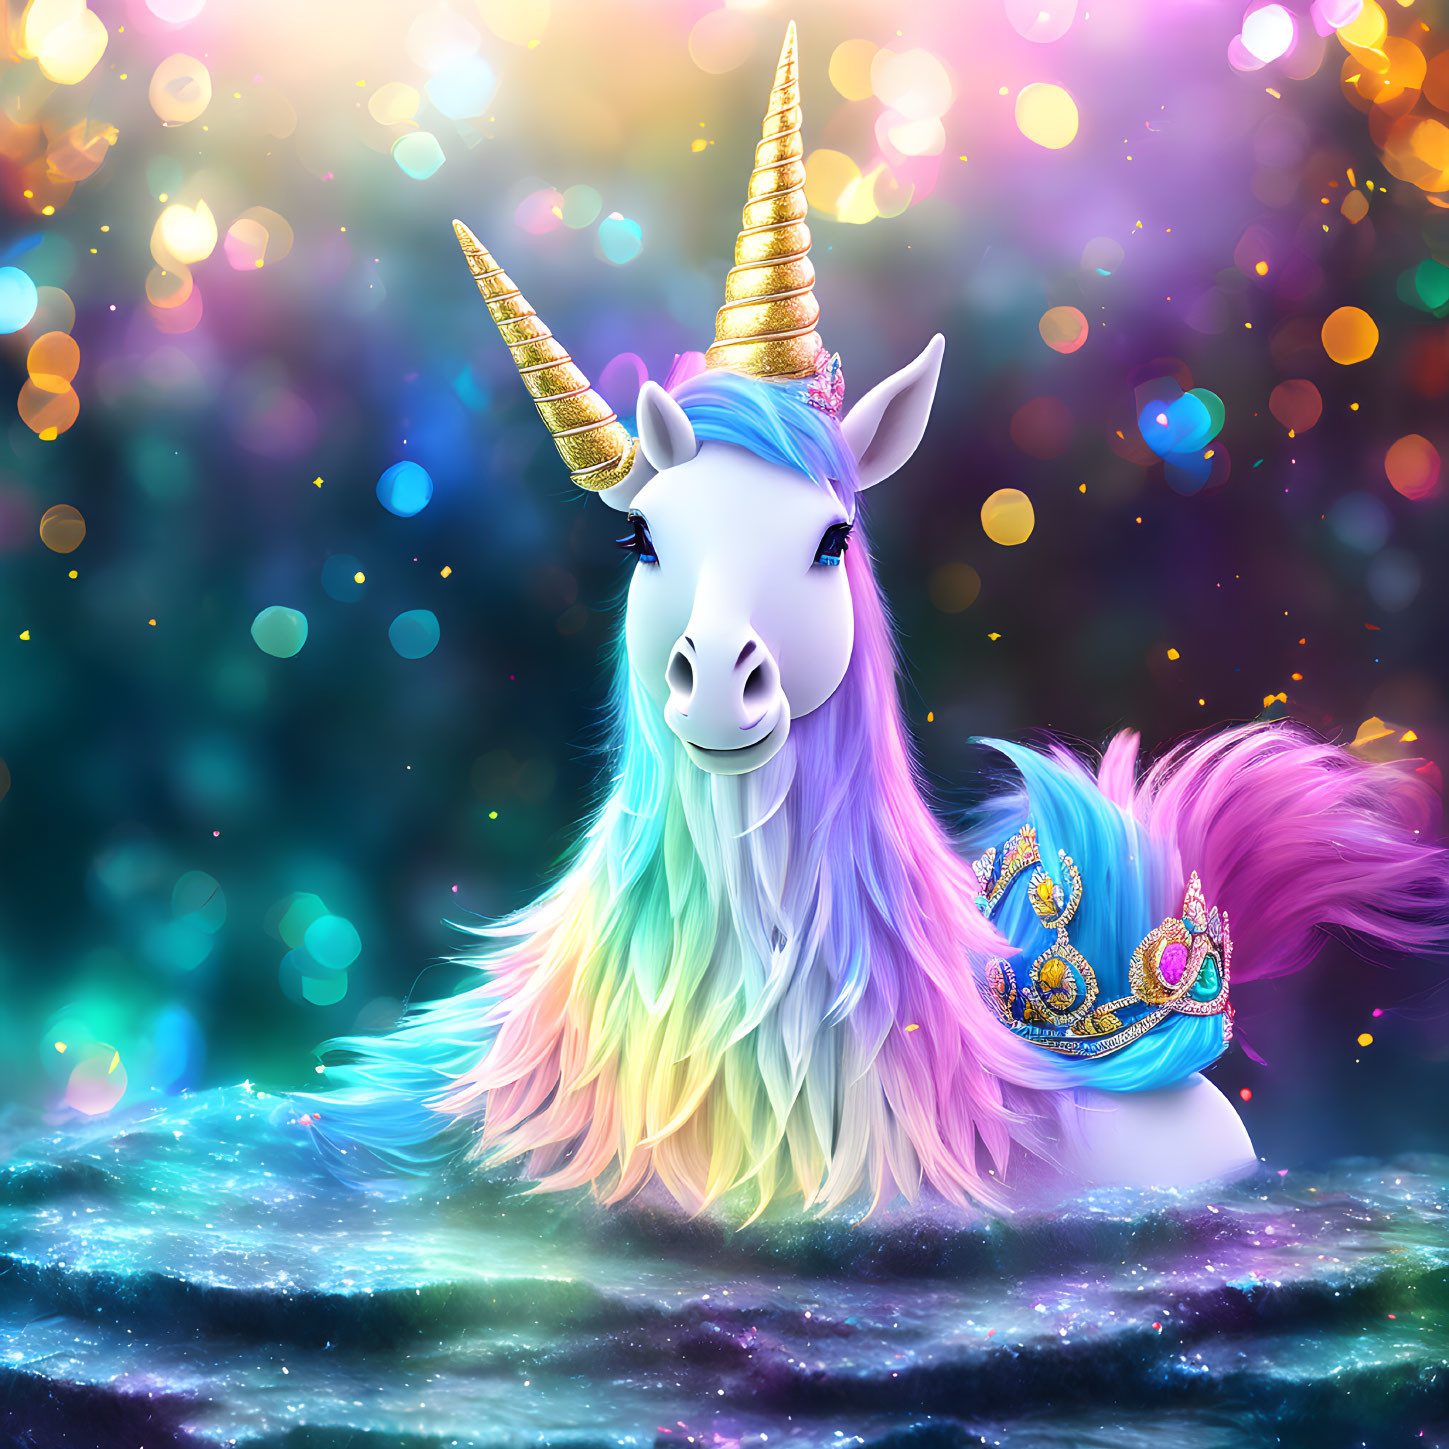 Colorful Unicorn with Rainbow Mane and Golden Horn on Bokeh Background